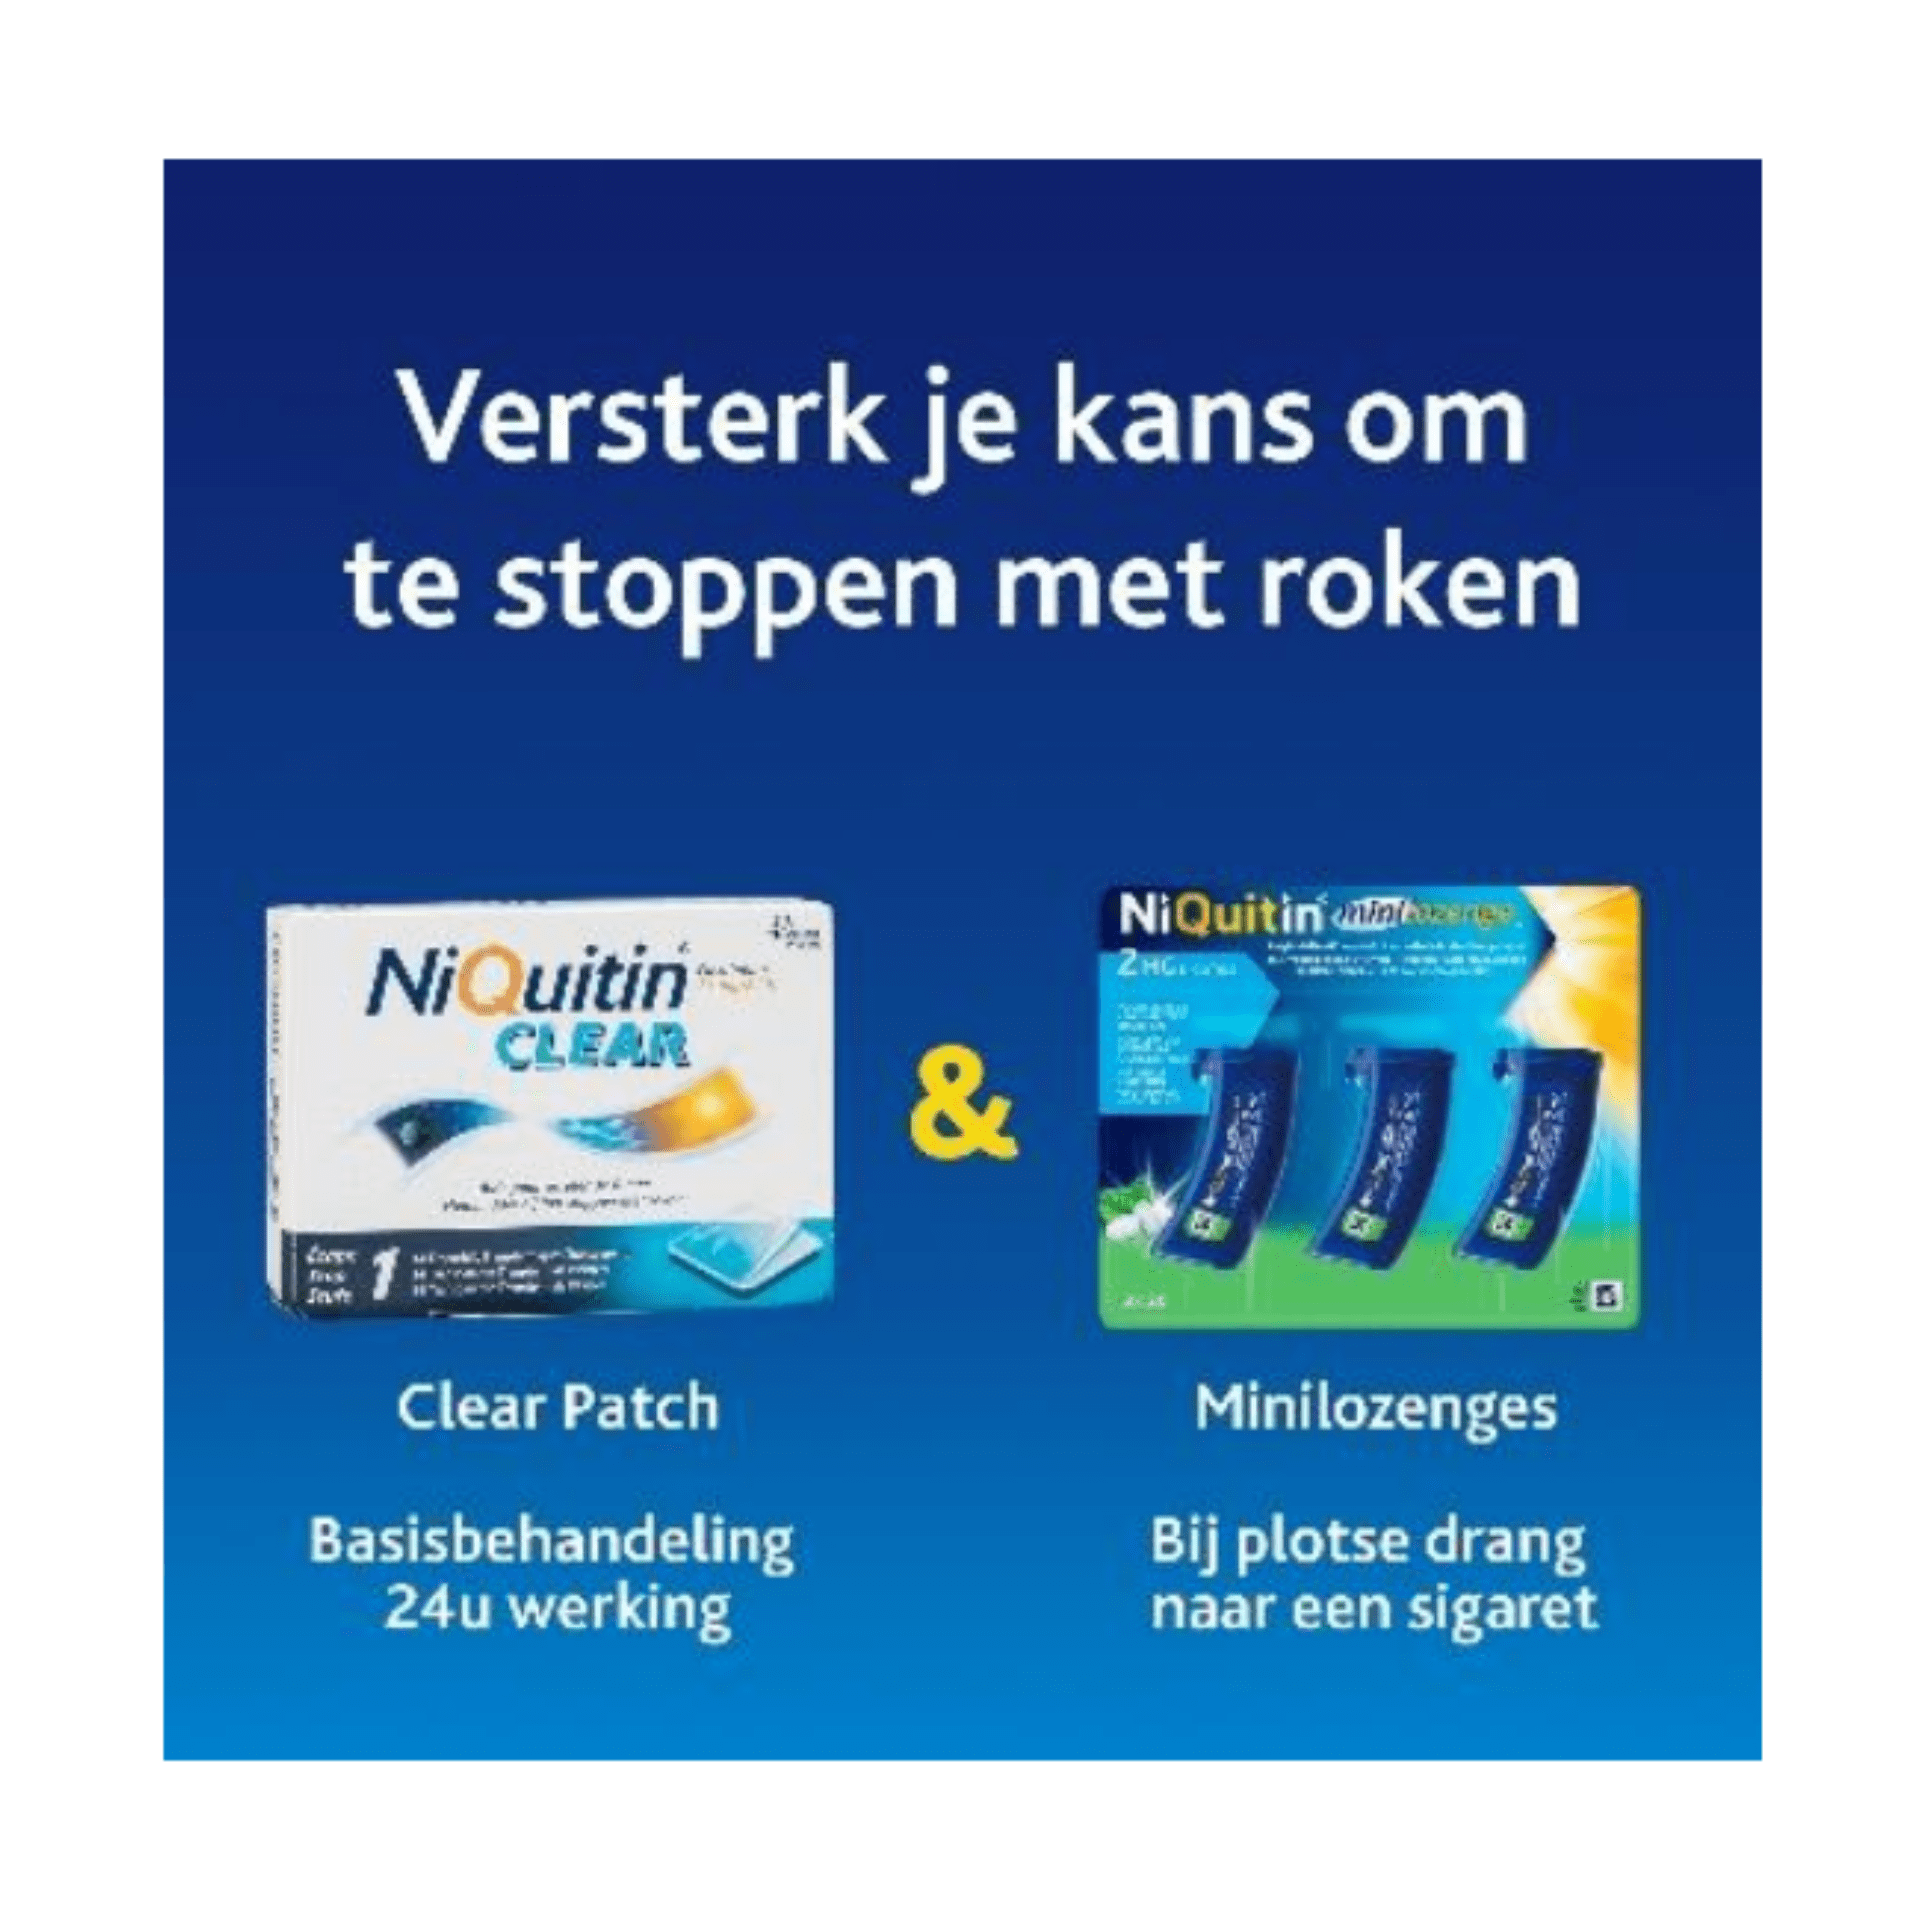 Niquitin Clear Patches 21 mg